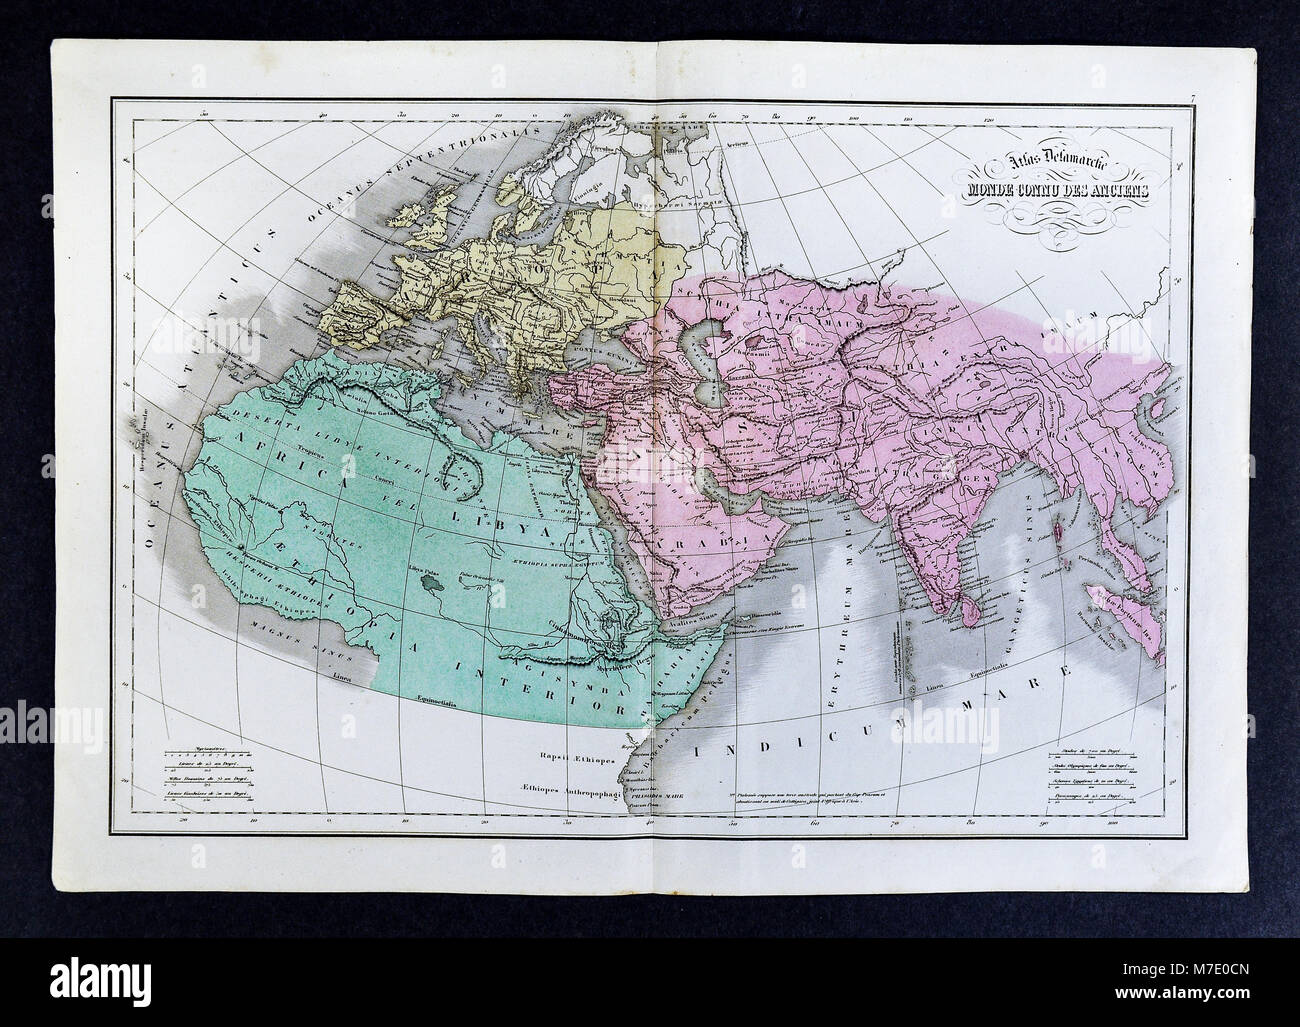 1858 Delamarche Map of Ancient World or World Known to the Ancients: Europe, Asia, Africa and Middle East Stock Photo